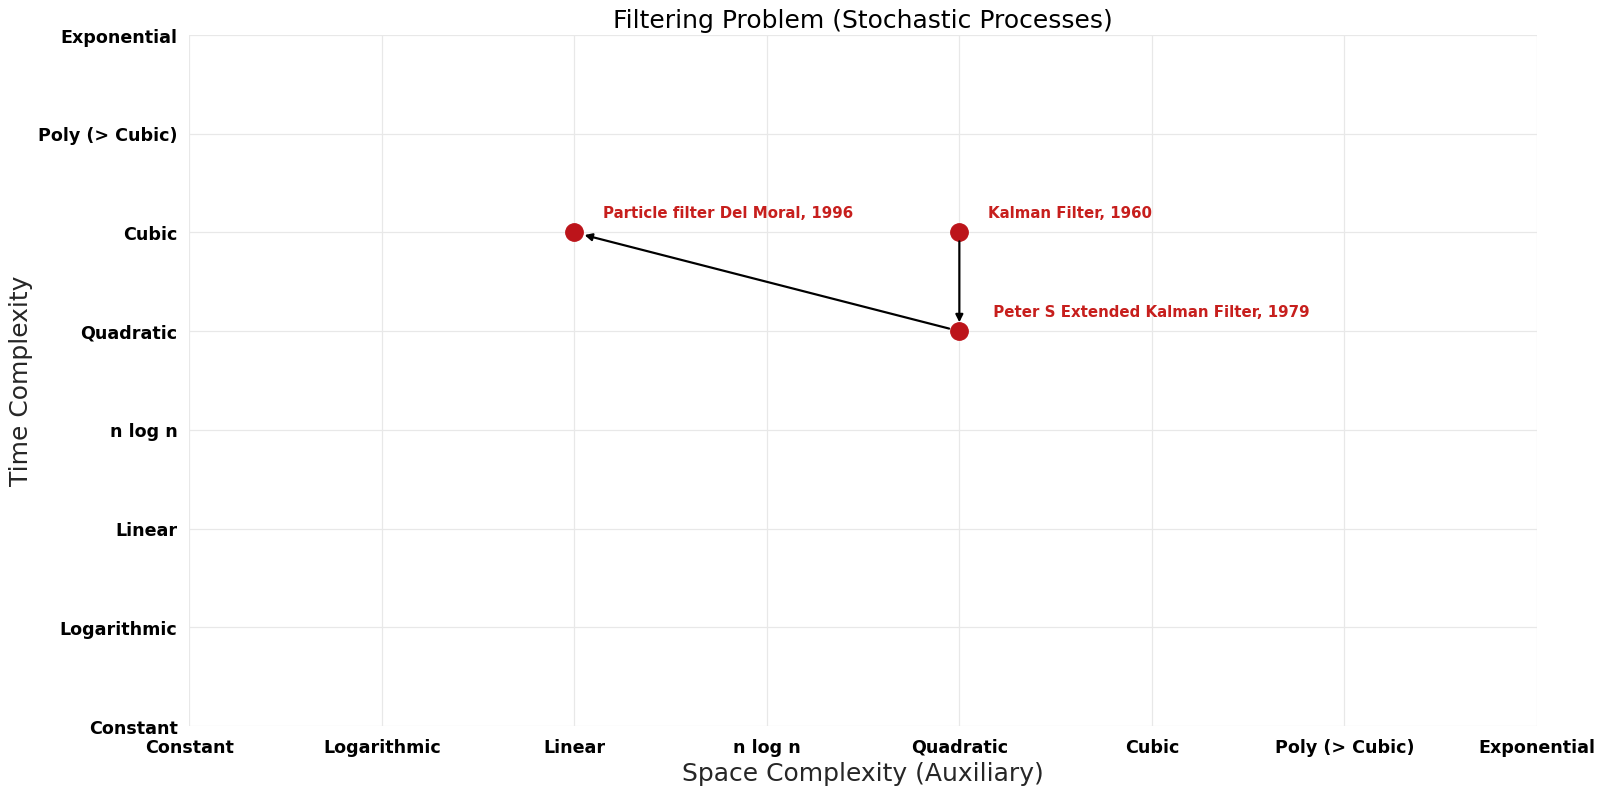 File:Filtering Problem (Stochastic Processes) - Pareto Frontier.png